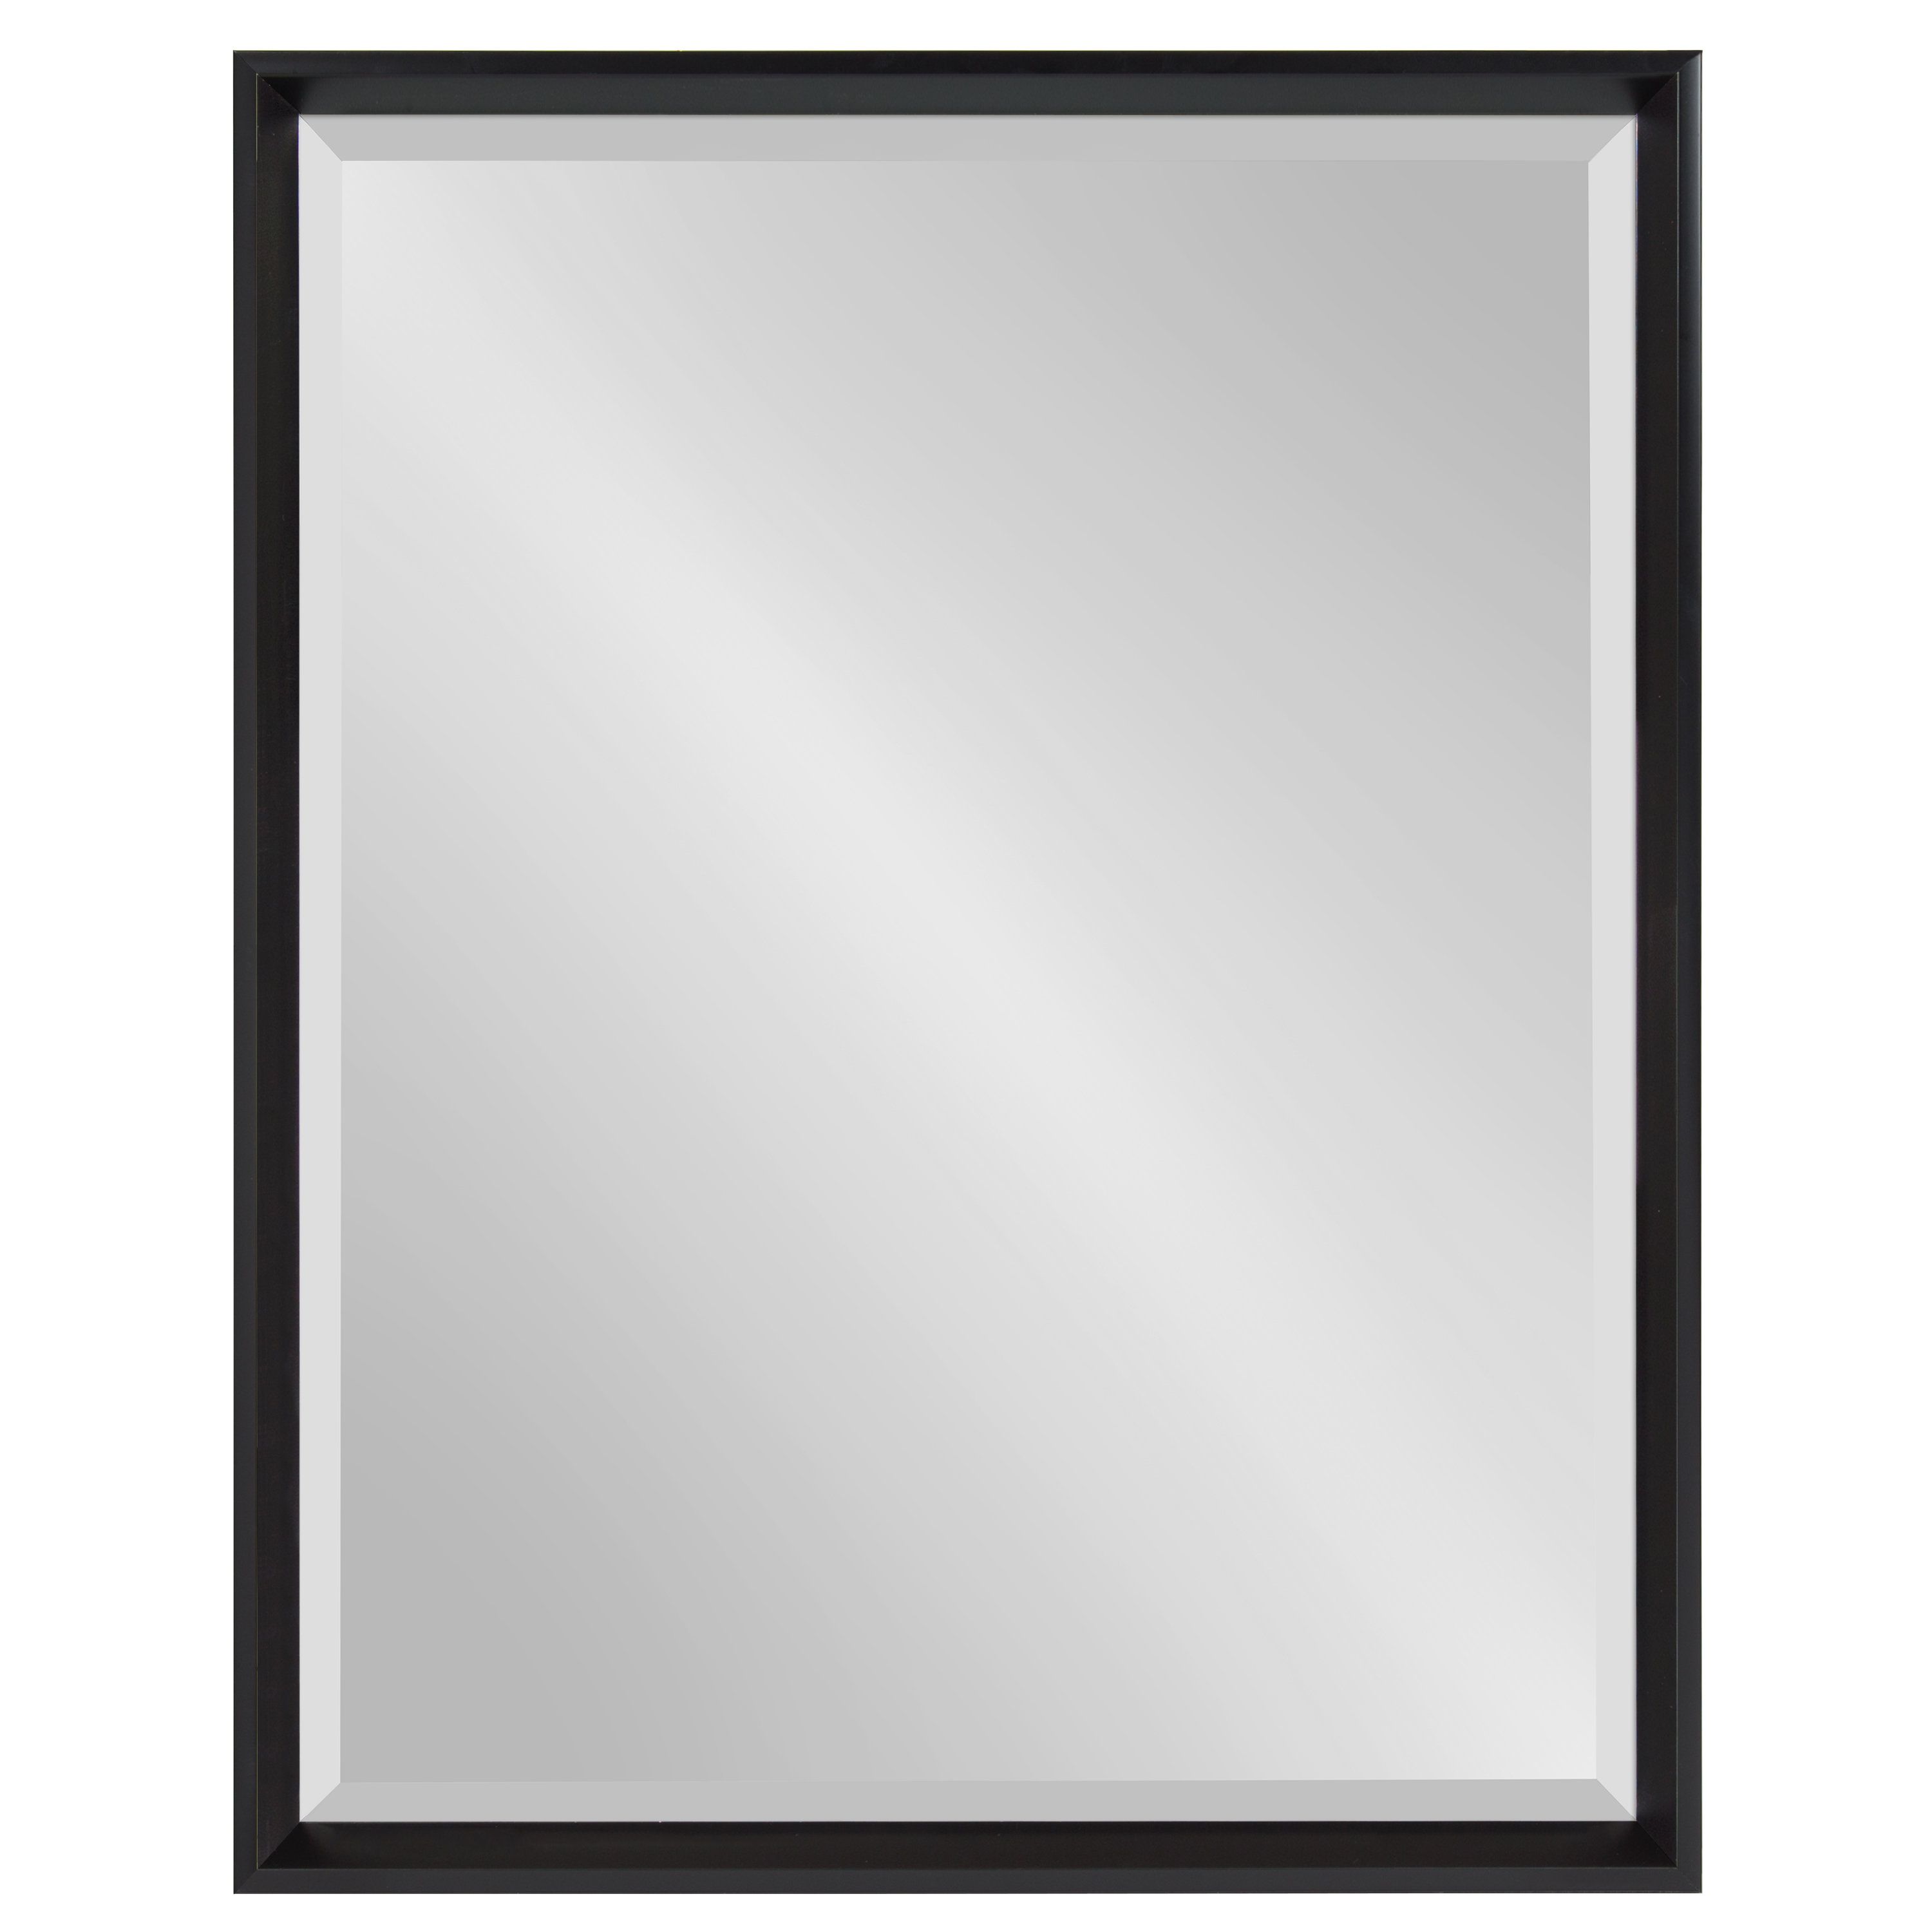 Kayden Accent Mirrors Pertaining To Most Popular Gatsby Decorative Traditional Beveled Accent Mirror (View 14 of 20)